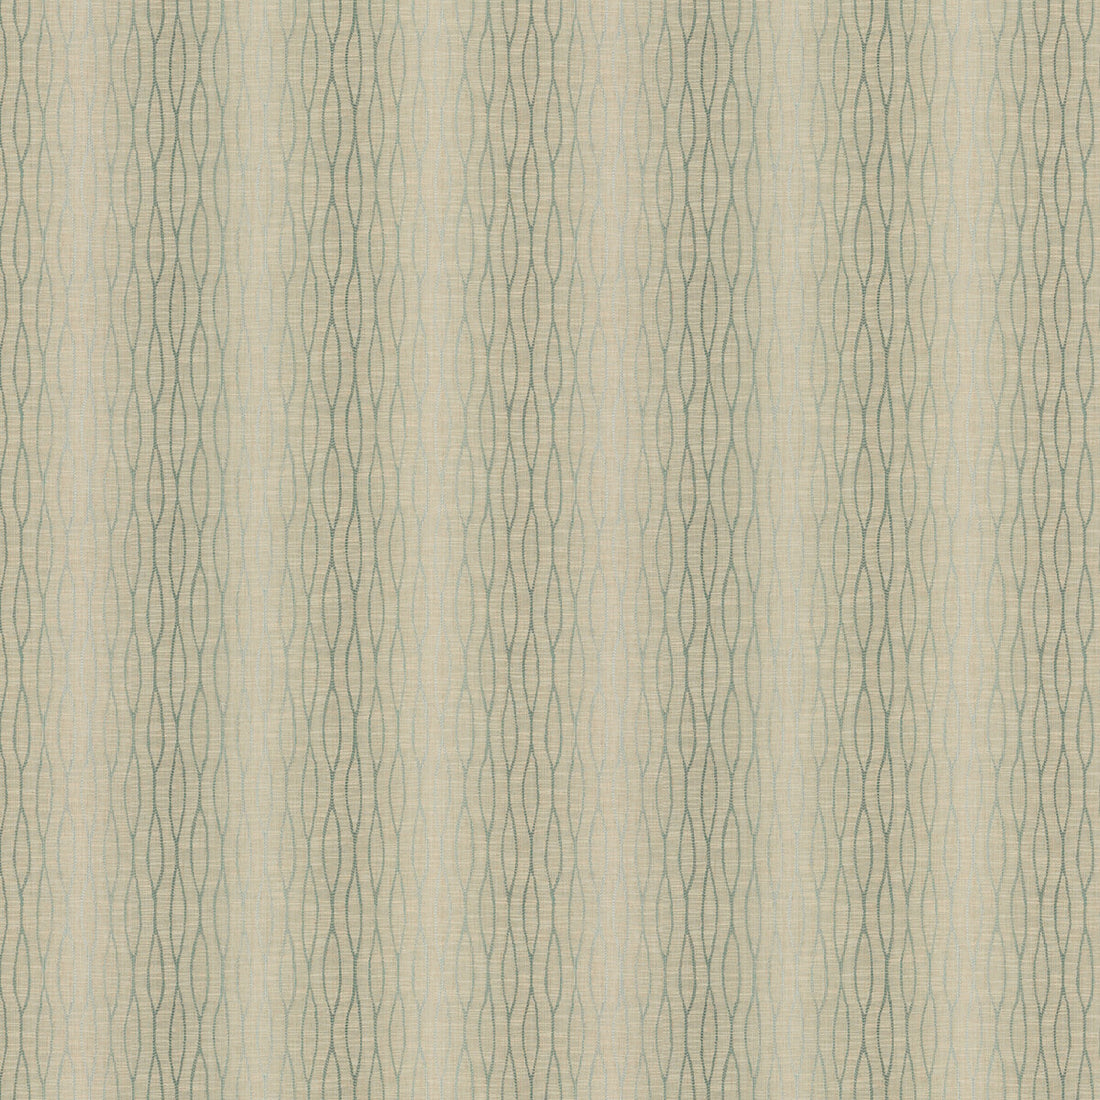 Waves Ombre fabric in aqua color - pattern GWF-2925.13.0 - by Lee Jofa Modern in the Allegra Hicks II collection